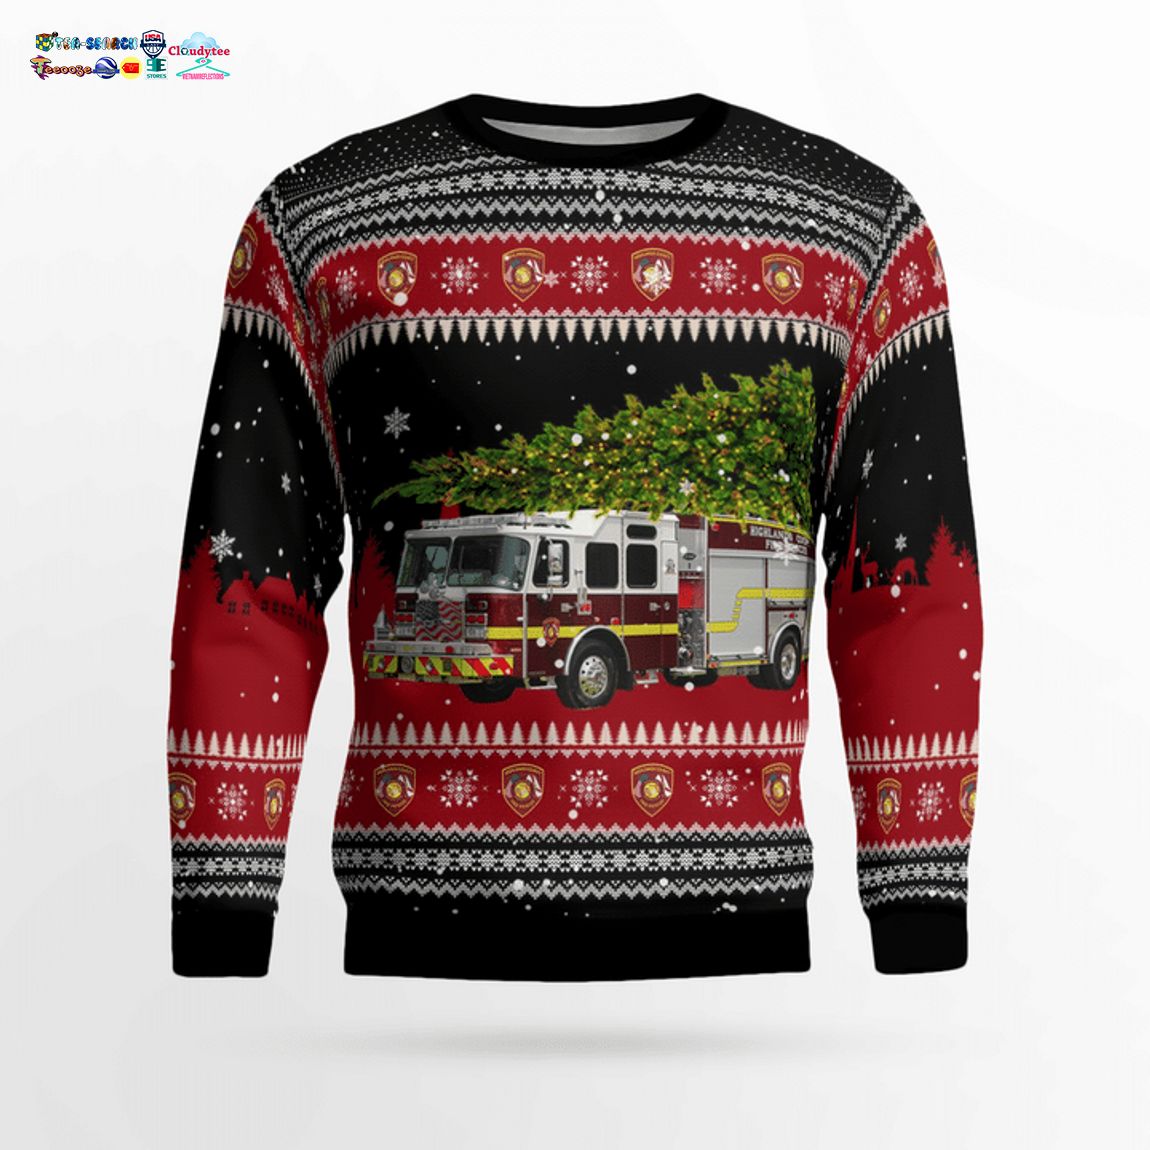 Florida Highlands County Fire Rescue 3D Christmas Sweater - Saleoff